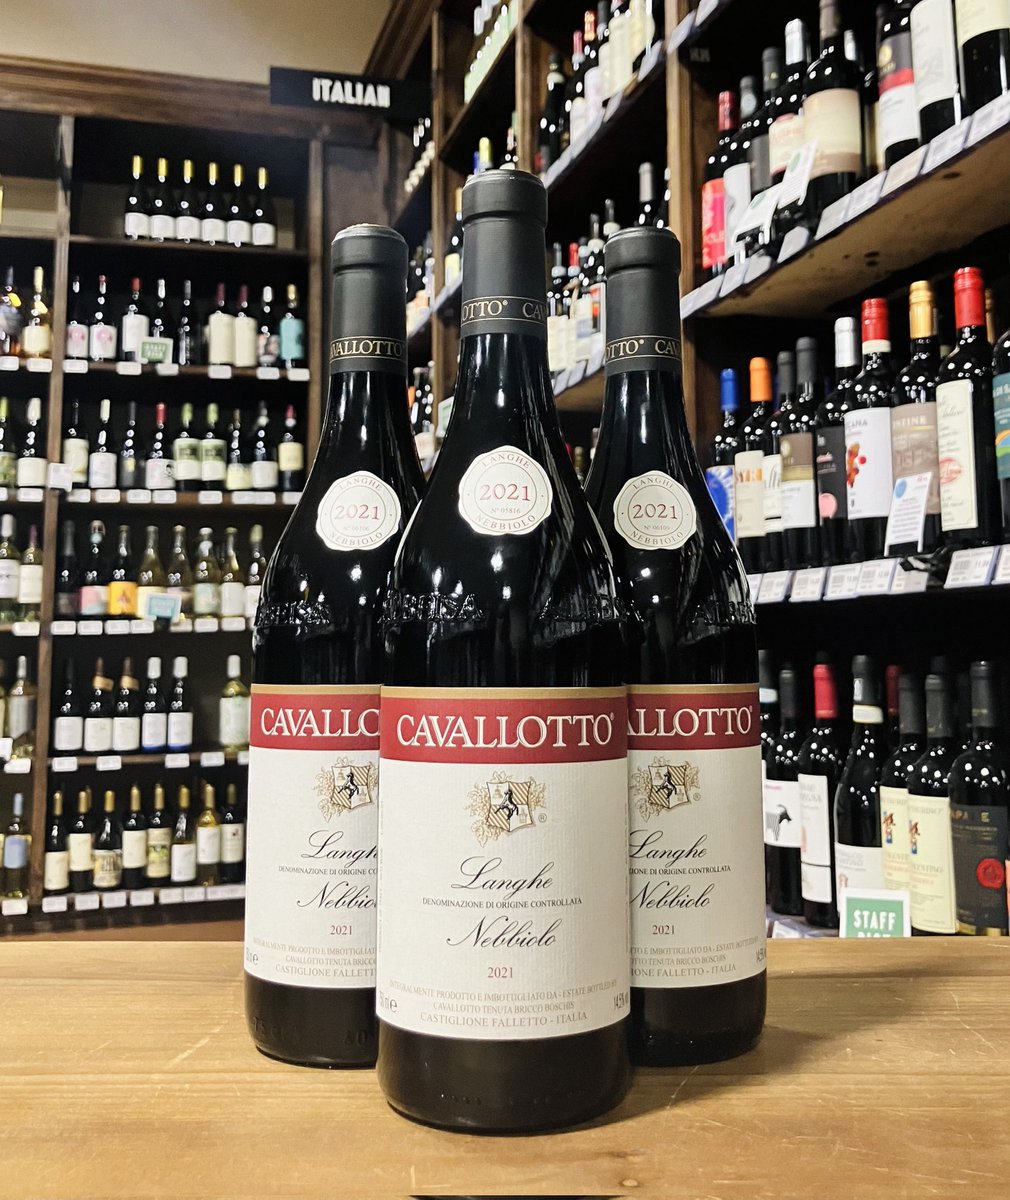 Cavallotto 2021 Nebbiolo from Langhe on Piedmont. This Langhe Nebbiolo is fruit from younger vines of Cavallotto's Barolo estate, vinified in nearly the same way as their Barolos. Drinks like a bigger pinot noir. #italianwine #nebbiolo #langhe #piedmont